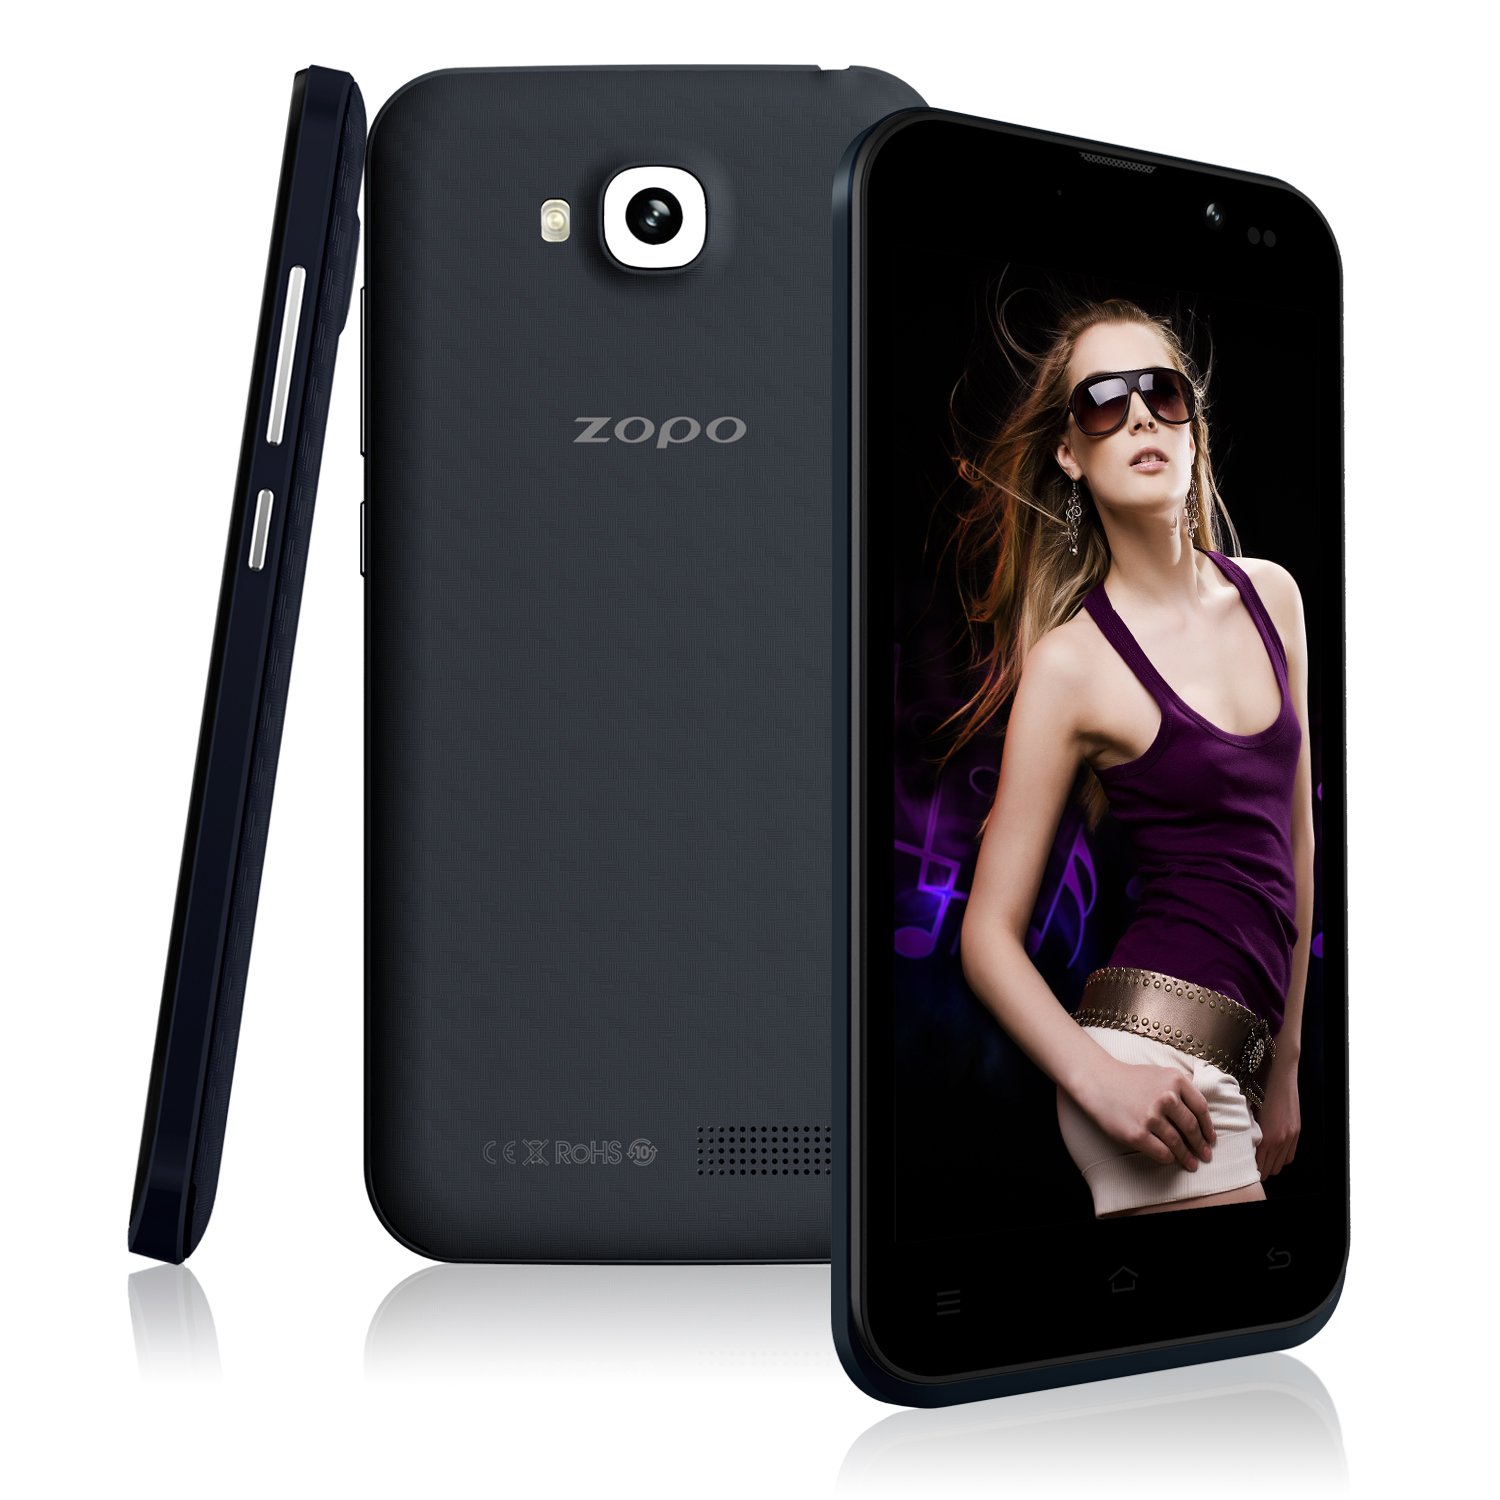 ZOPO ZP700 - 3G Android 4.2 Smartphone